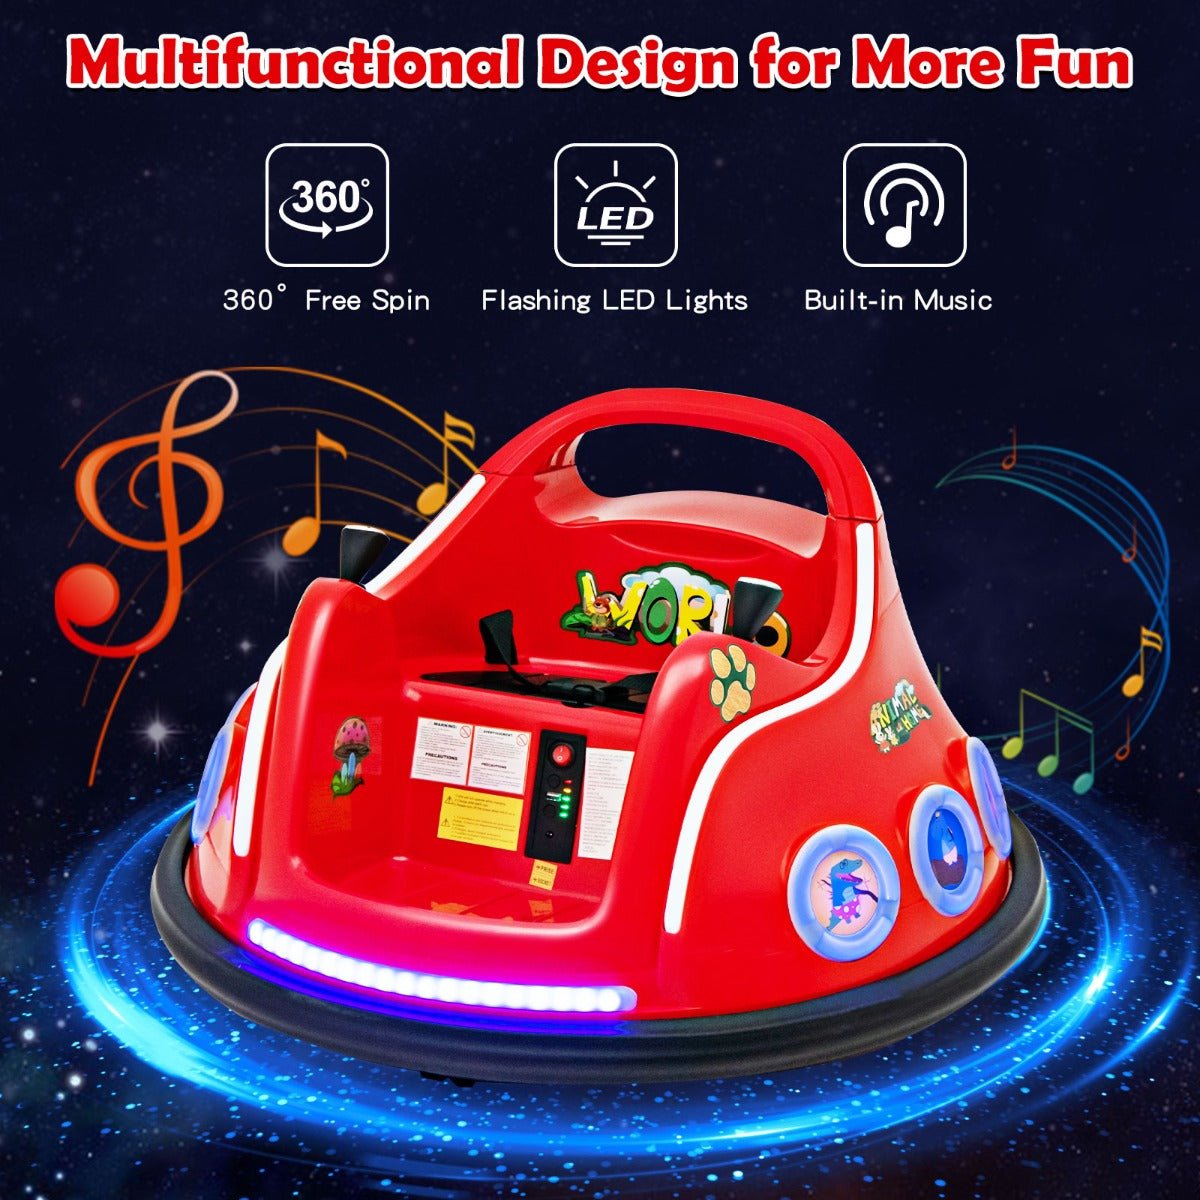 Buy the Red Electric Bumper Car - Fun and Thrills Await